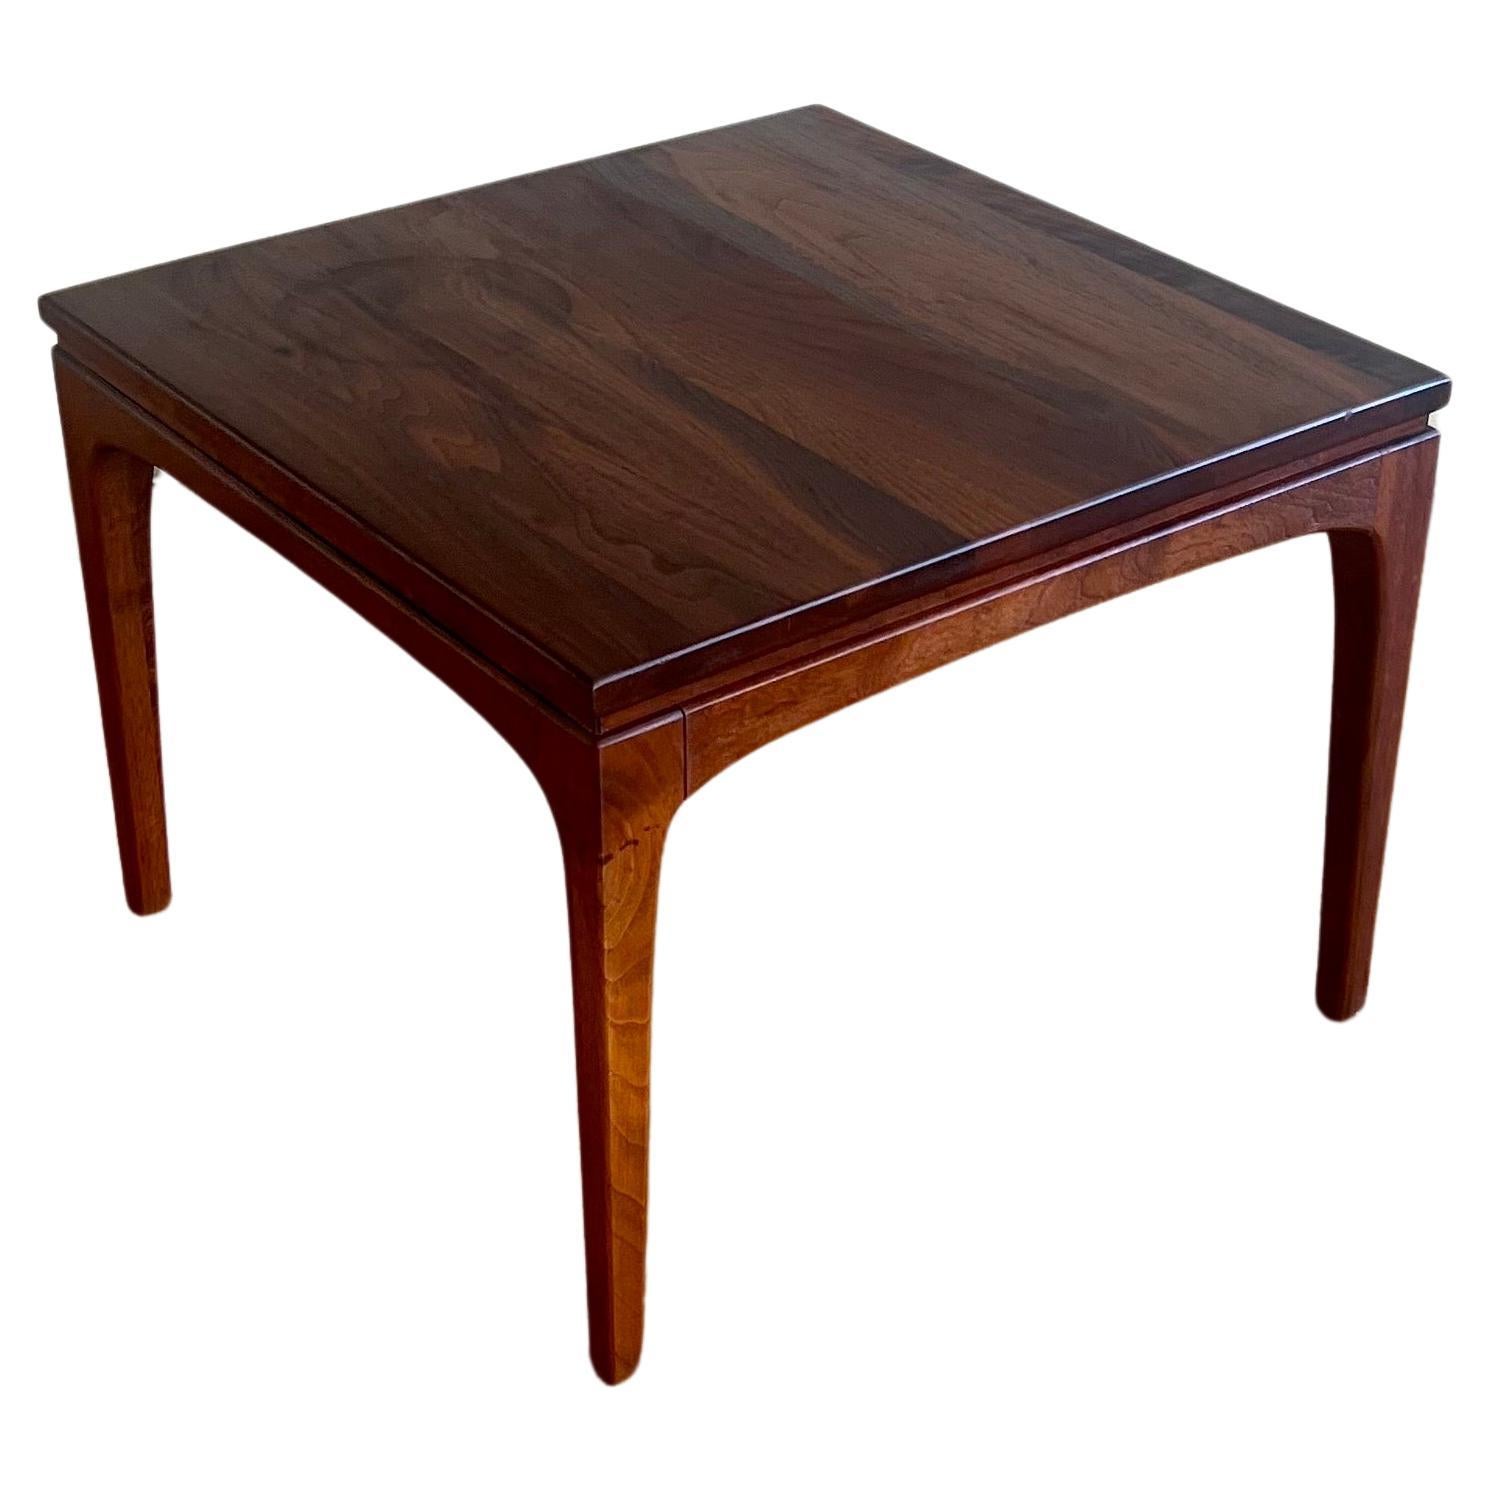 1960s American Modern California Design Solid Walnut Small Cocktail End Table For Sale